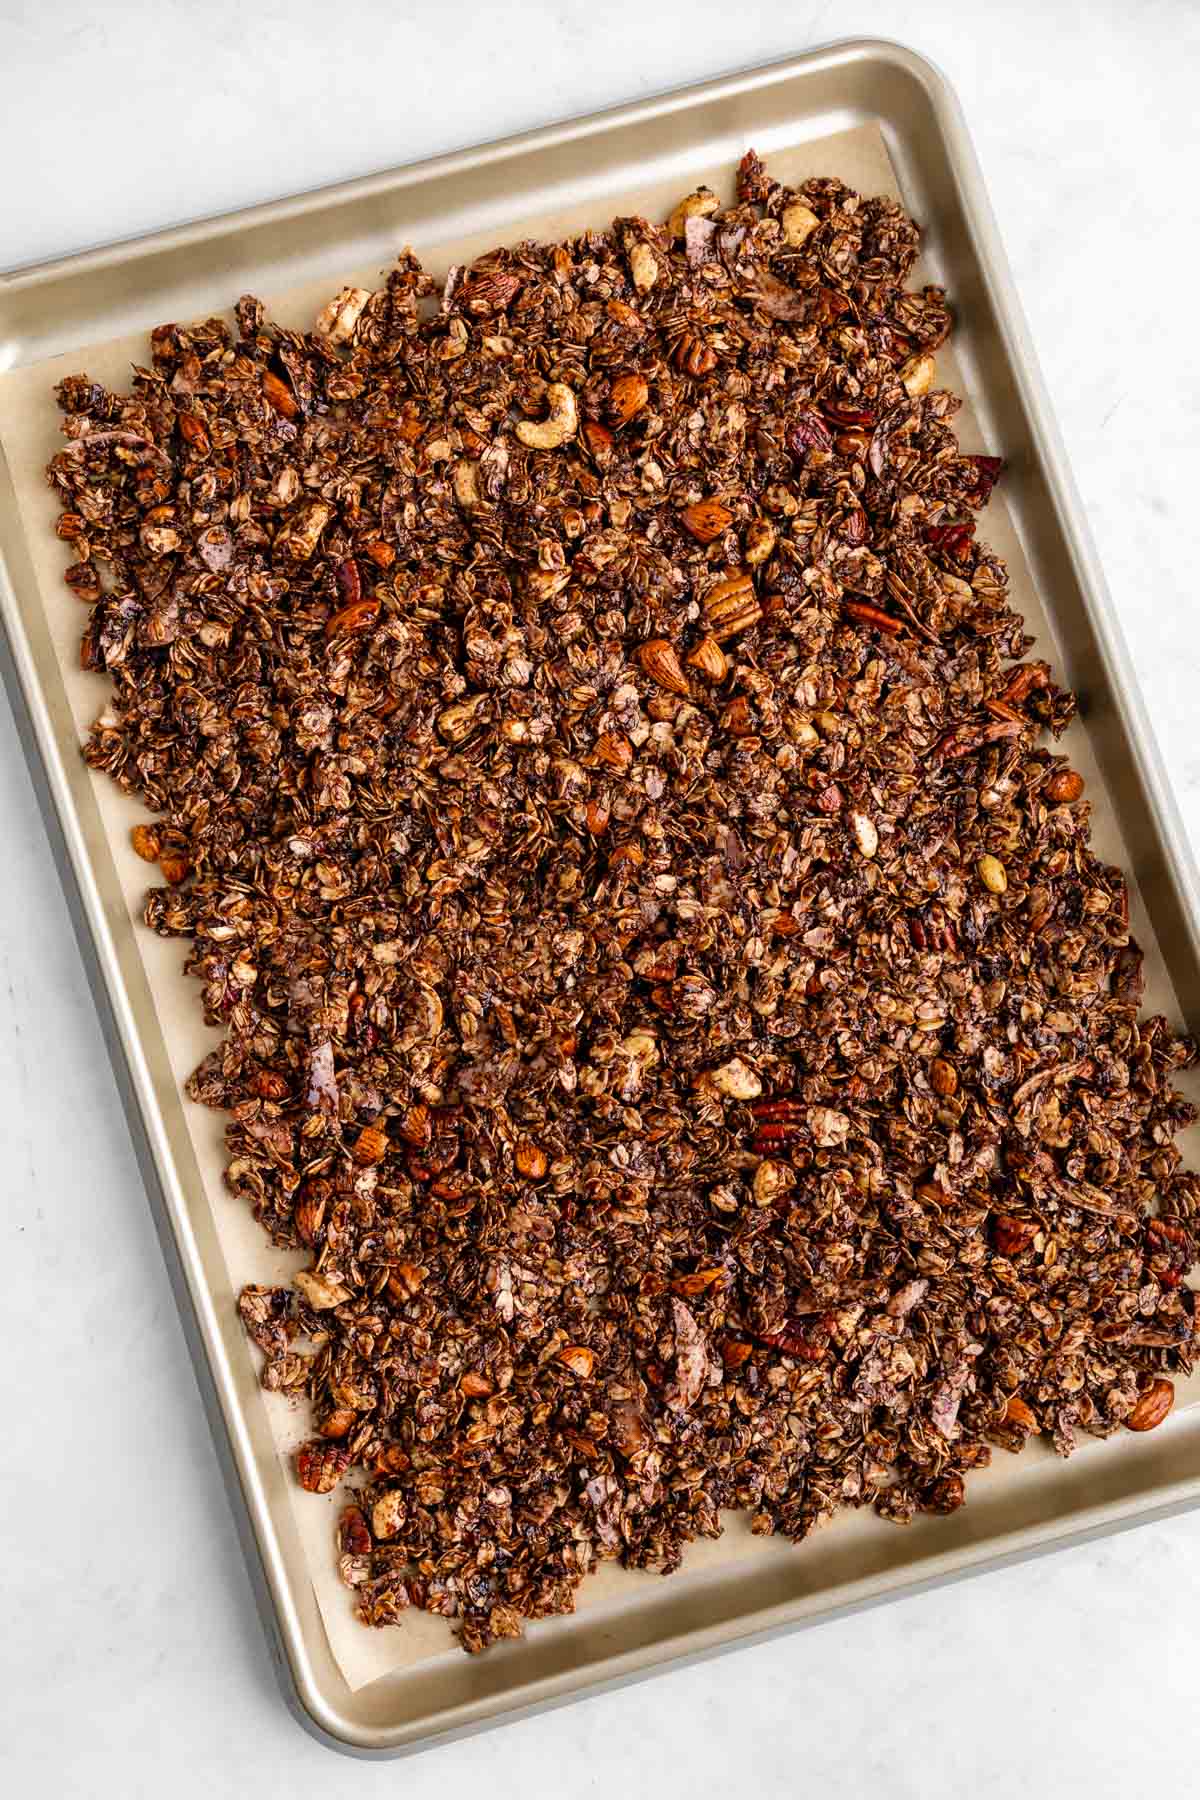 homemade chocolate coconut granola spread on a baking sheet before baking